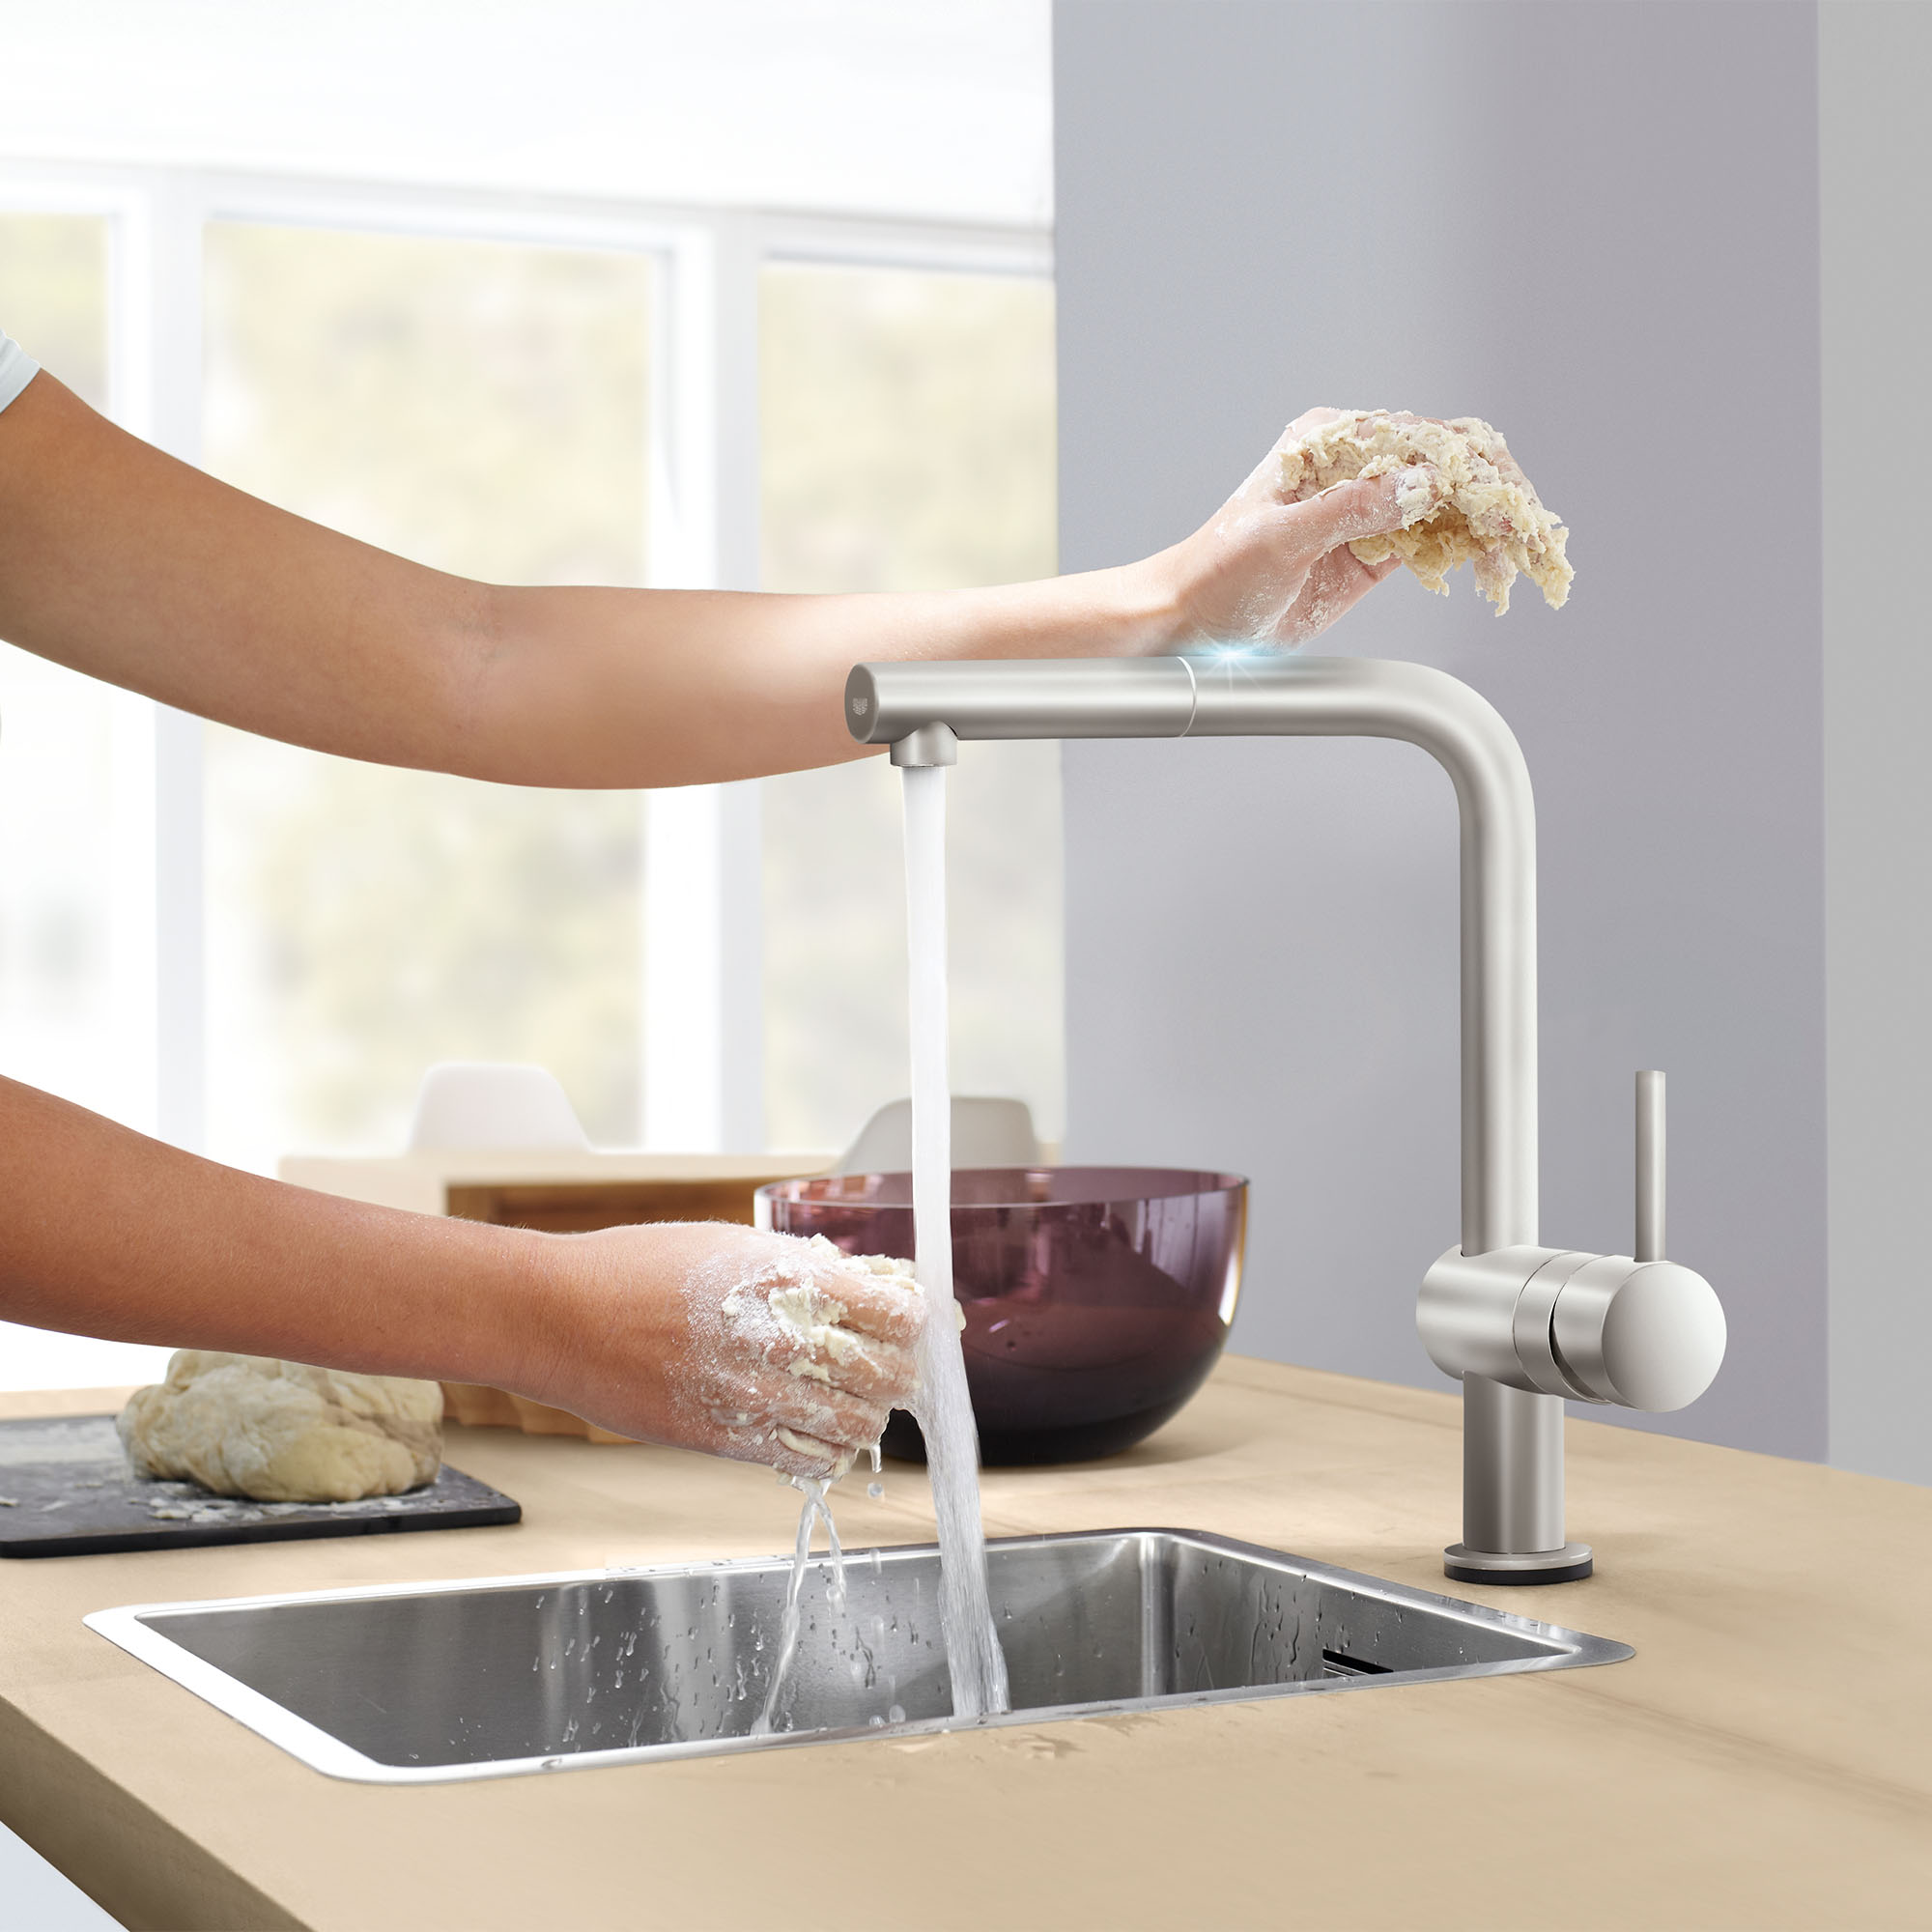 Minta Single-Handle Pull-Out Kitchen Faucet Single Spray 1.75 GPM (6.6 L/min) with Touch Technology